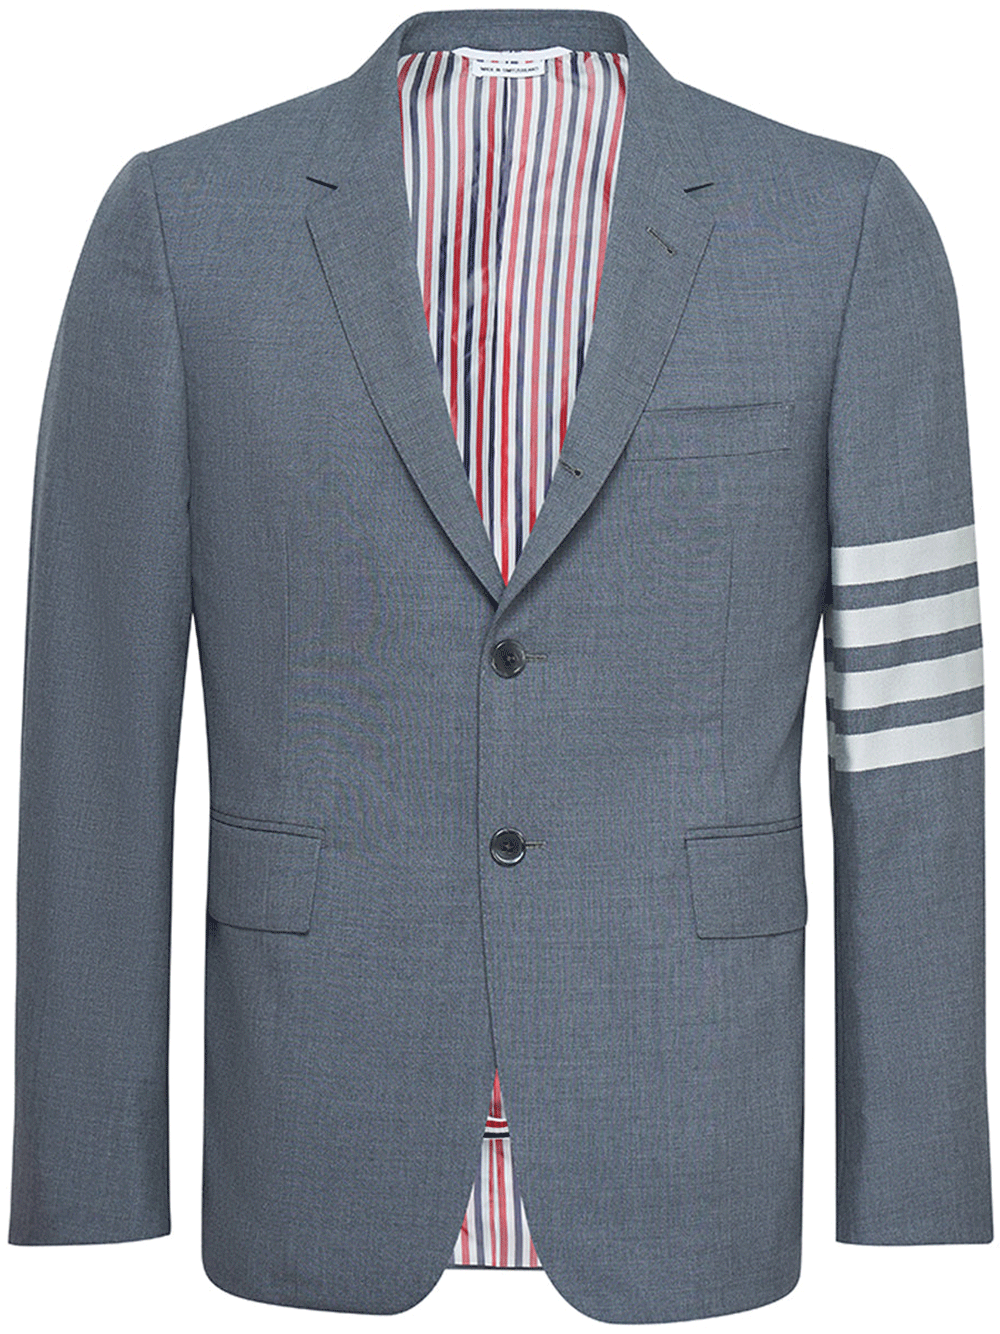 Thom-Browne-Products-Classic-In-Engineered-Jacket-Grey-1